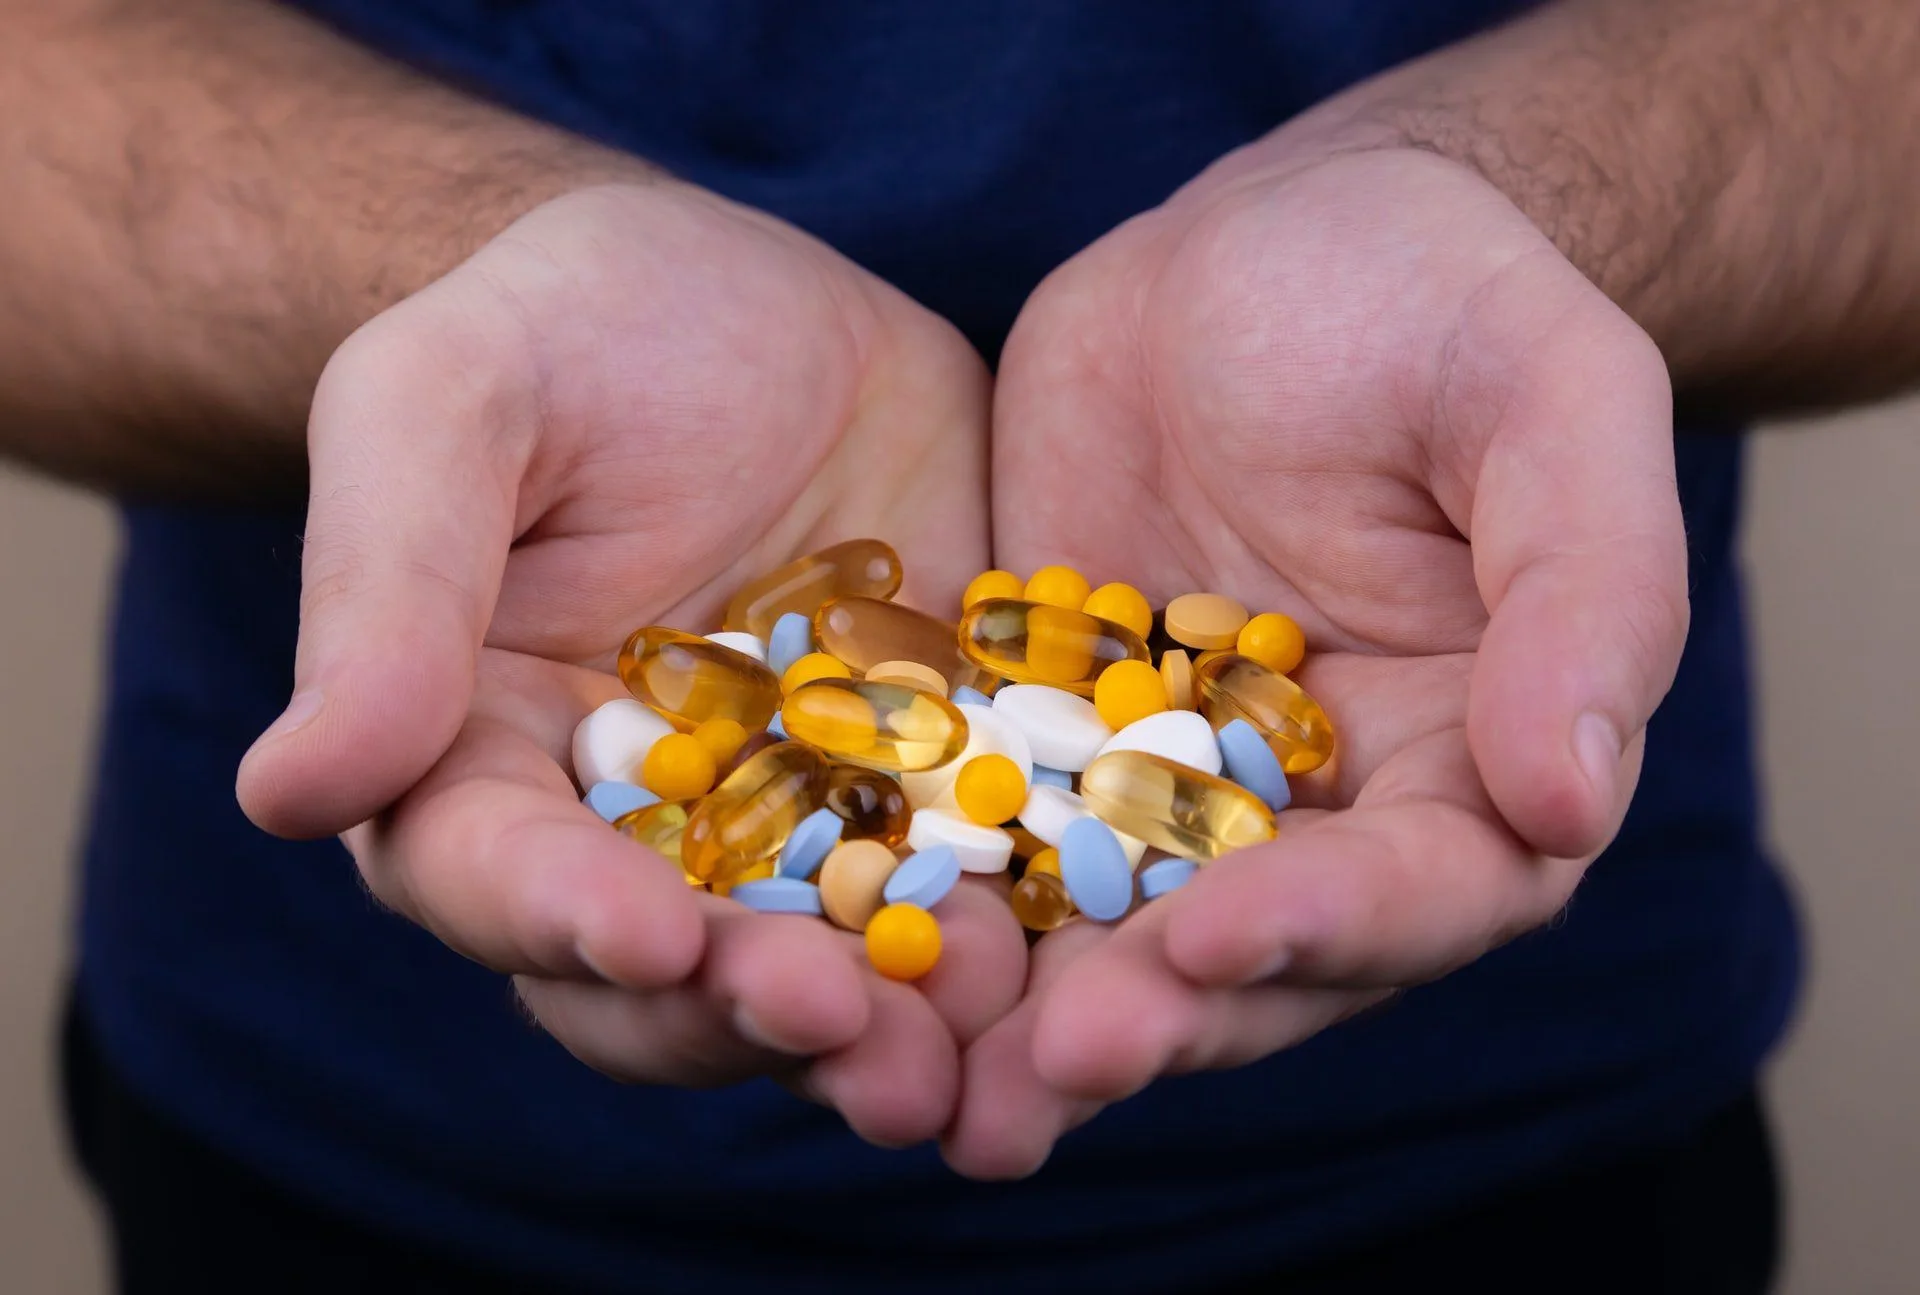 Antidepressants Weight Gain and Other Side Effects